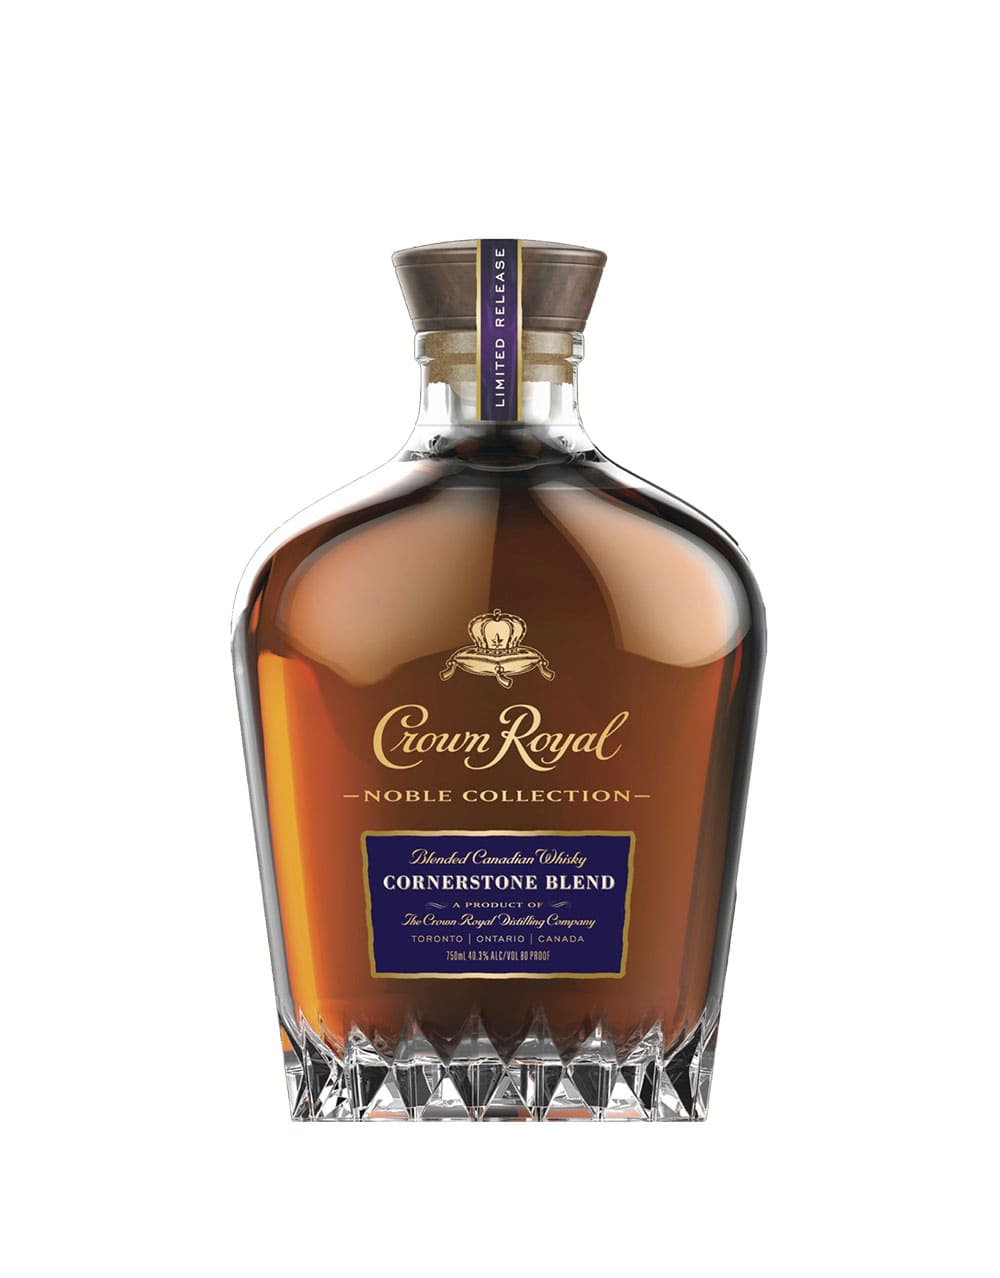 Crown Royal Noble Collection Cornerstone Blend Whisky